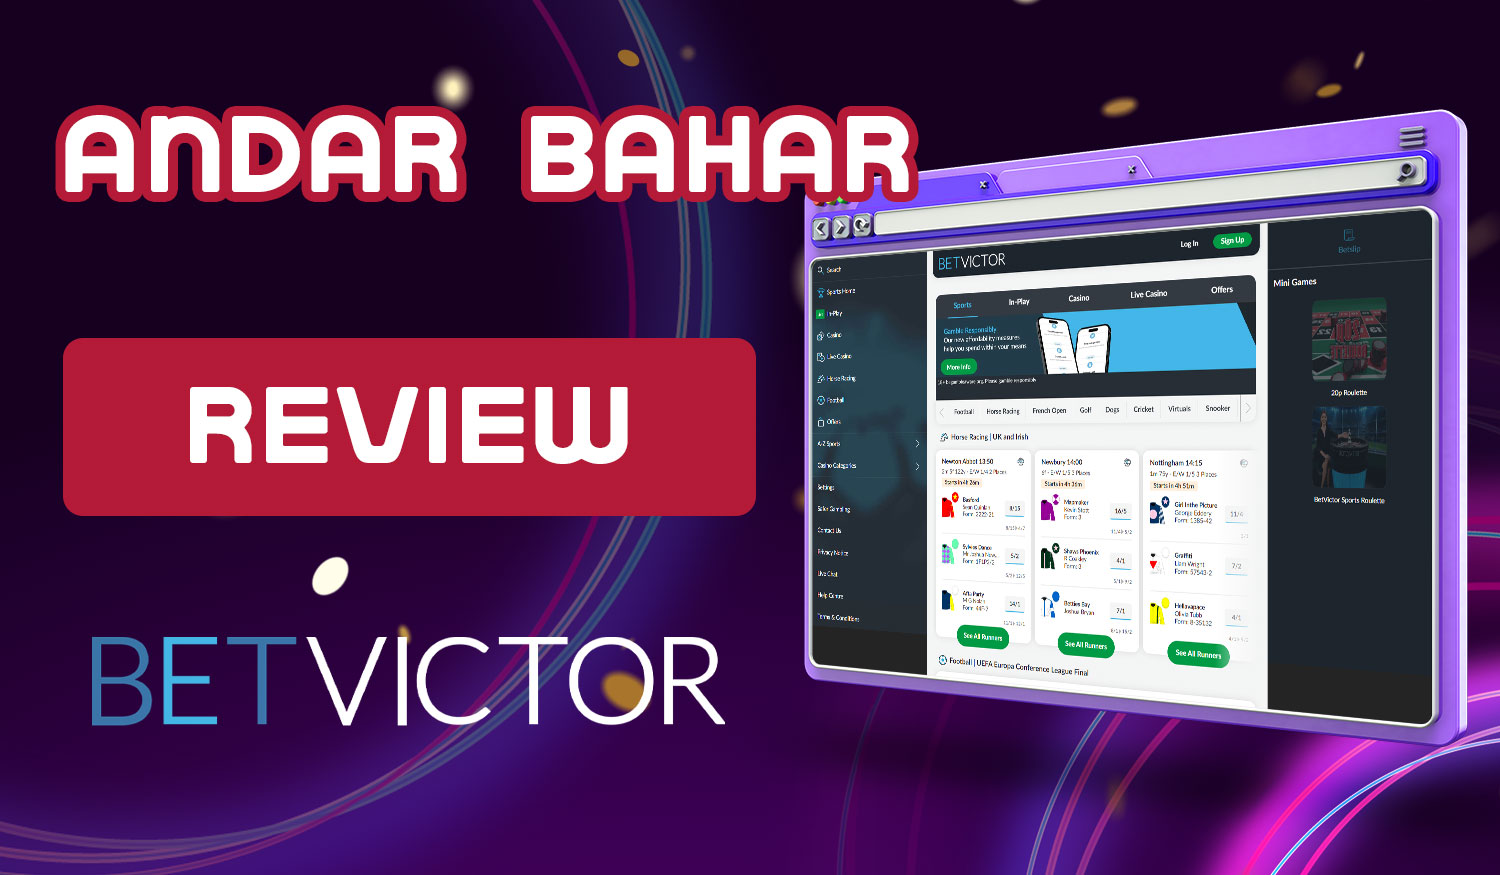 Detailed review of the bookmaker BetVictor on the Andar Bahar websites